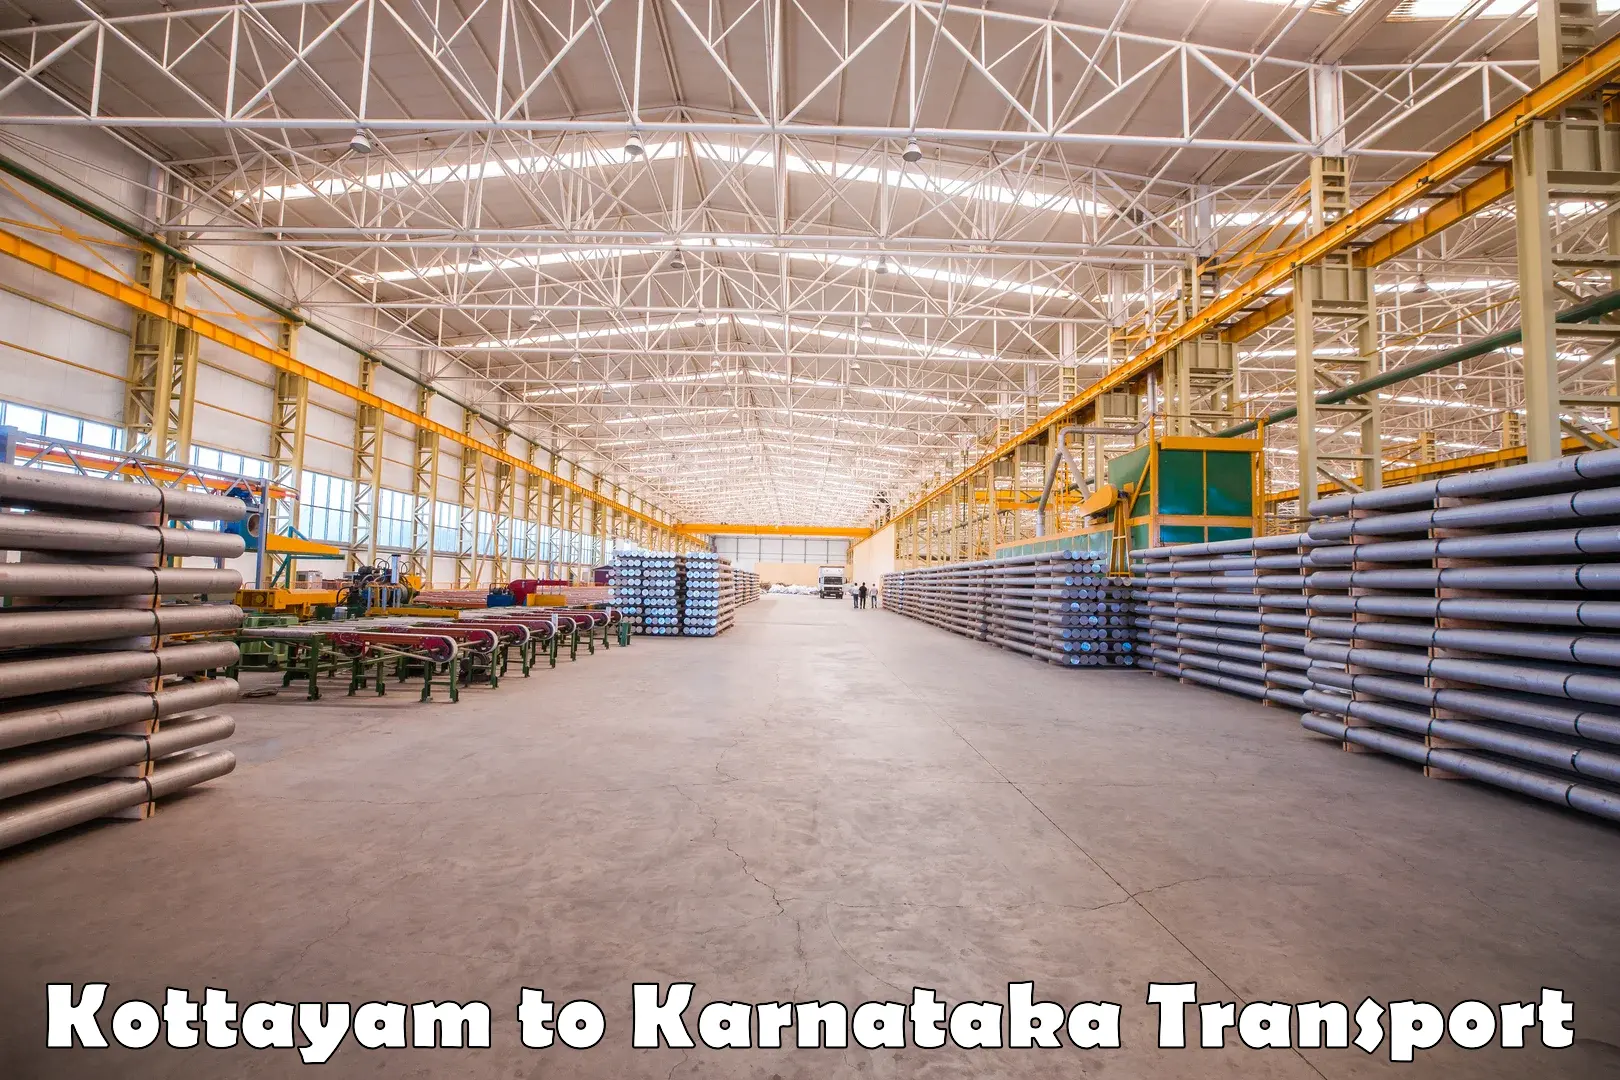 Air freight transport services in Kottayam to Madikeri